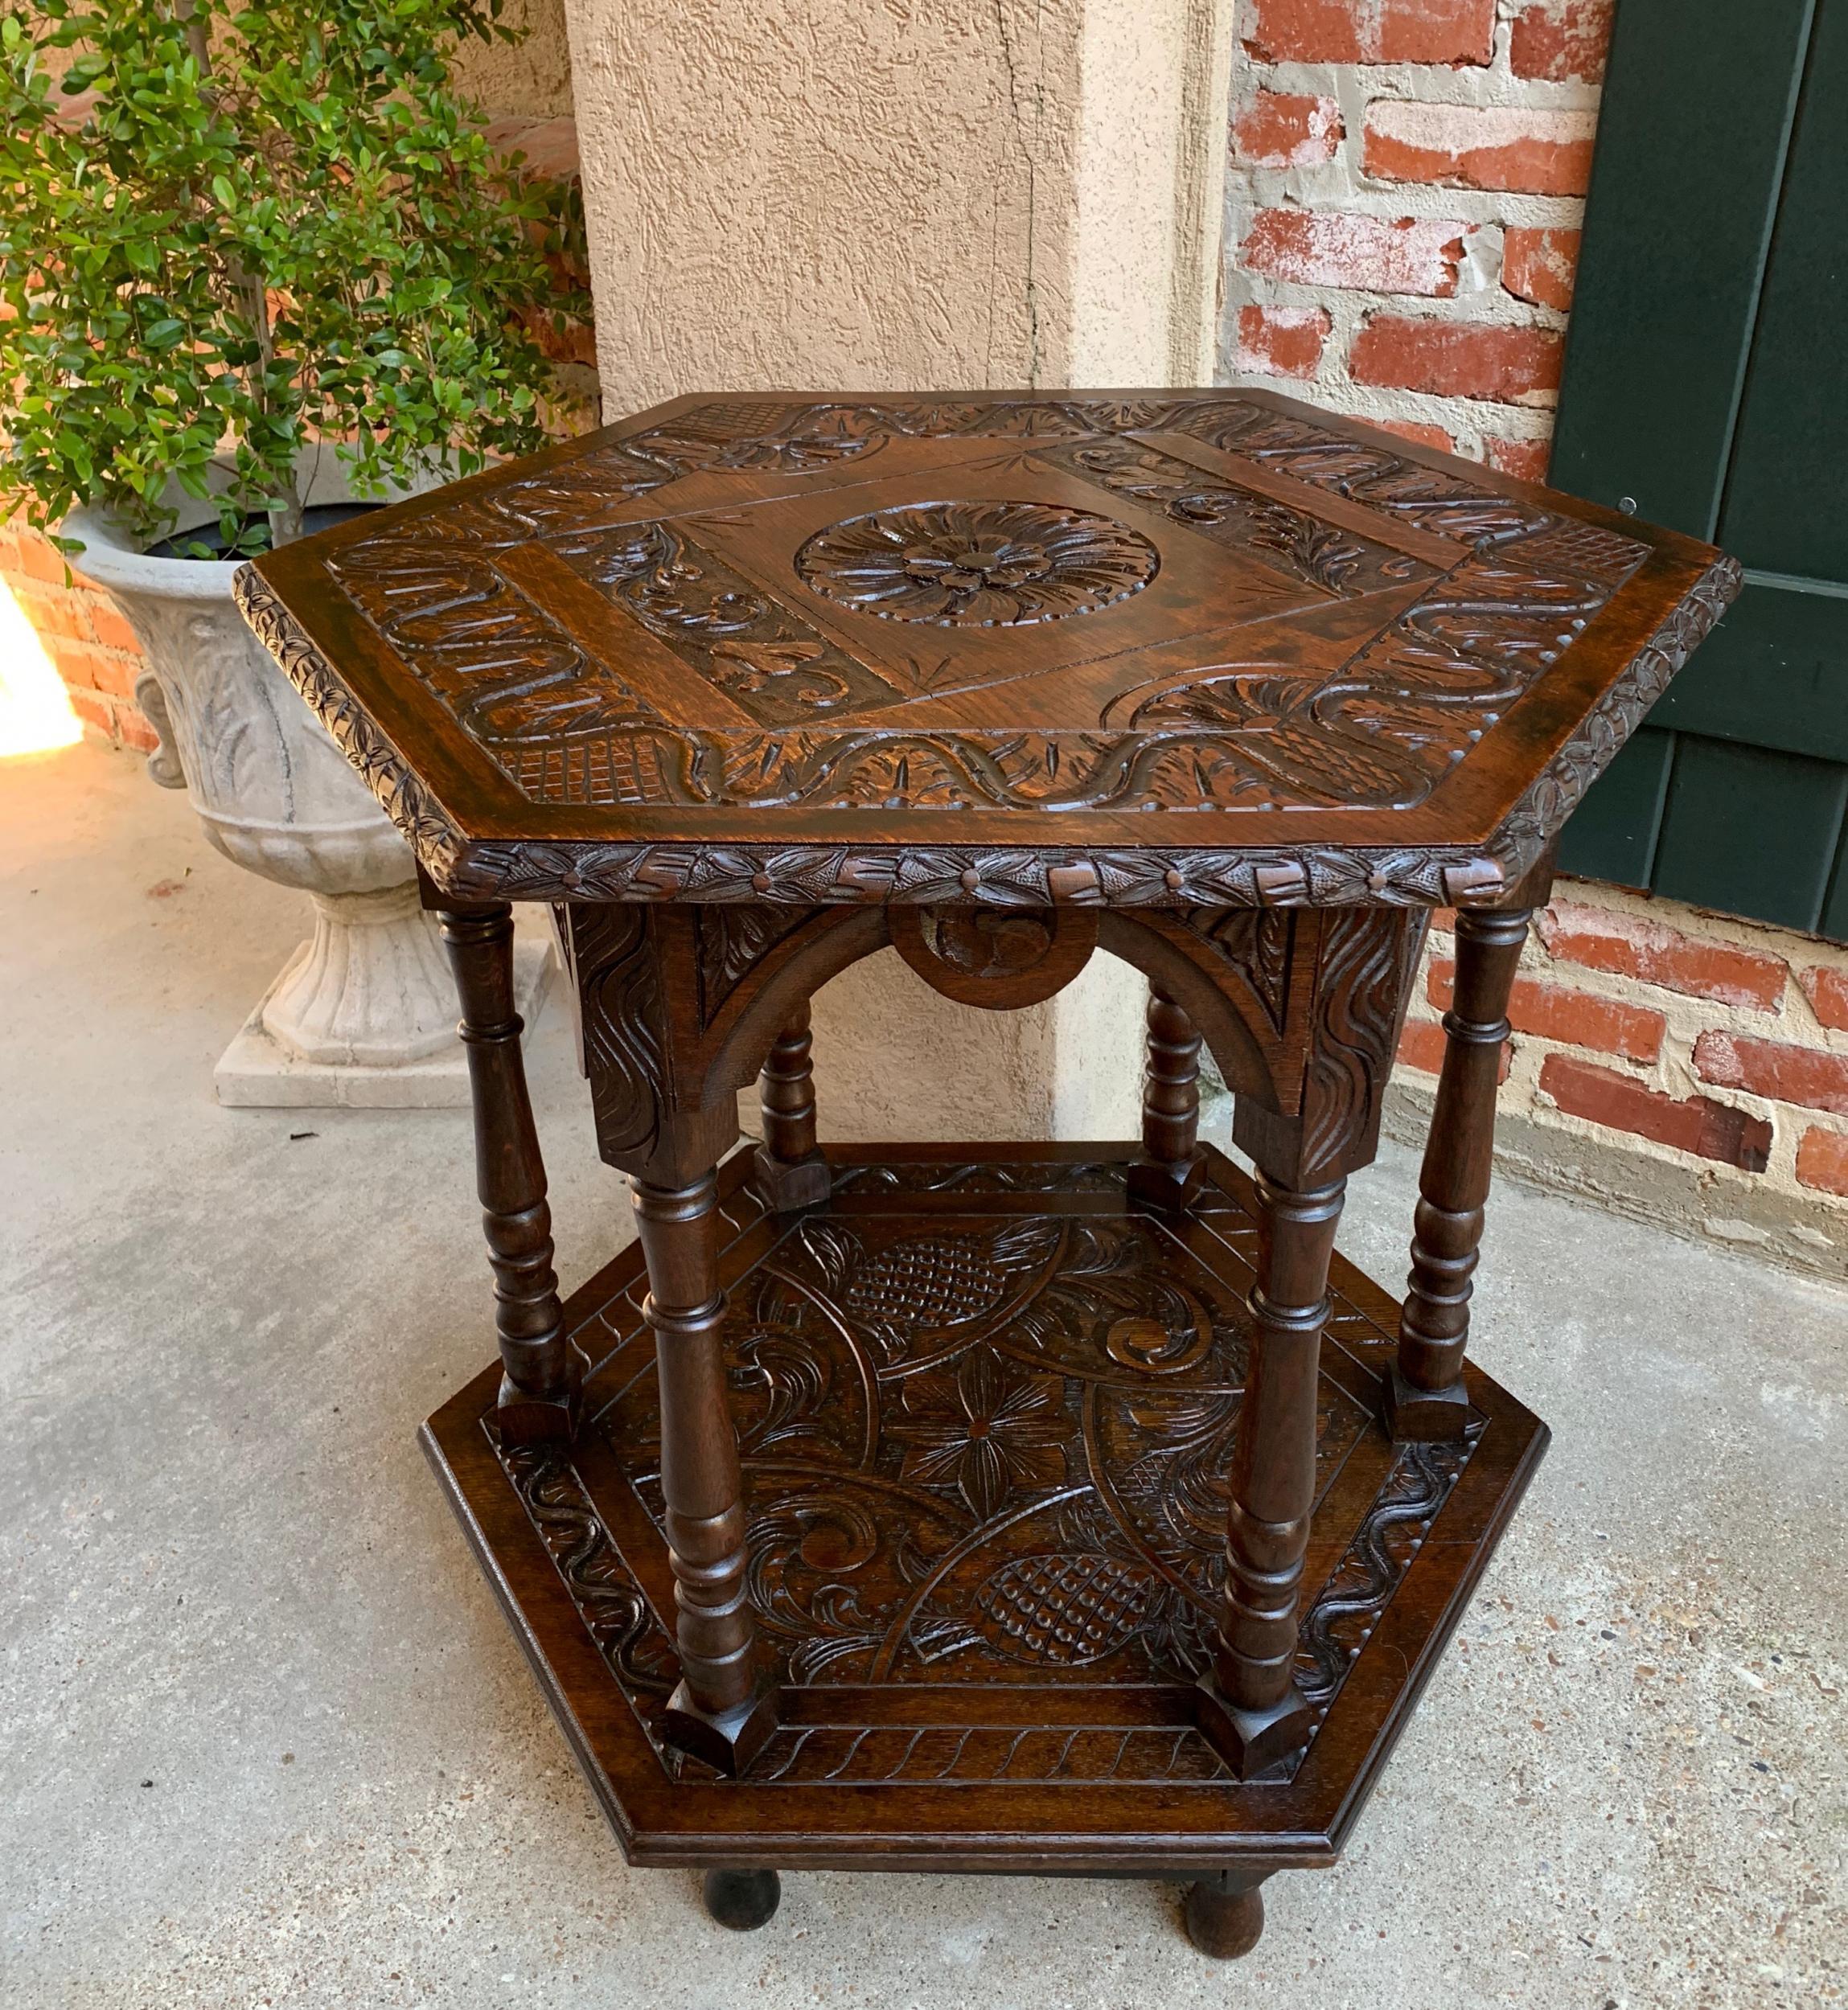 19th century French carved oak center side table hexagon two-tier with lower shelf.

~Heavily carved antique French oak center table~
~Striking hexagon shaped upper and lower tier, each completely carved~
~Scalloped, arched and carved apron above